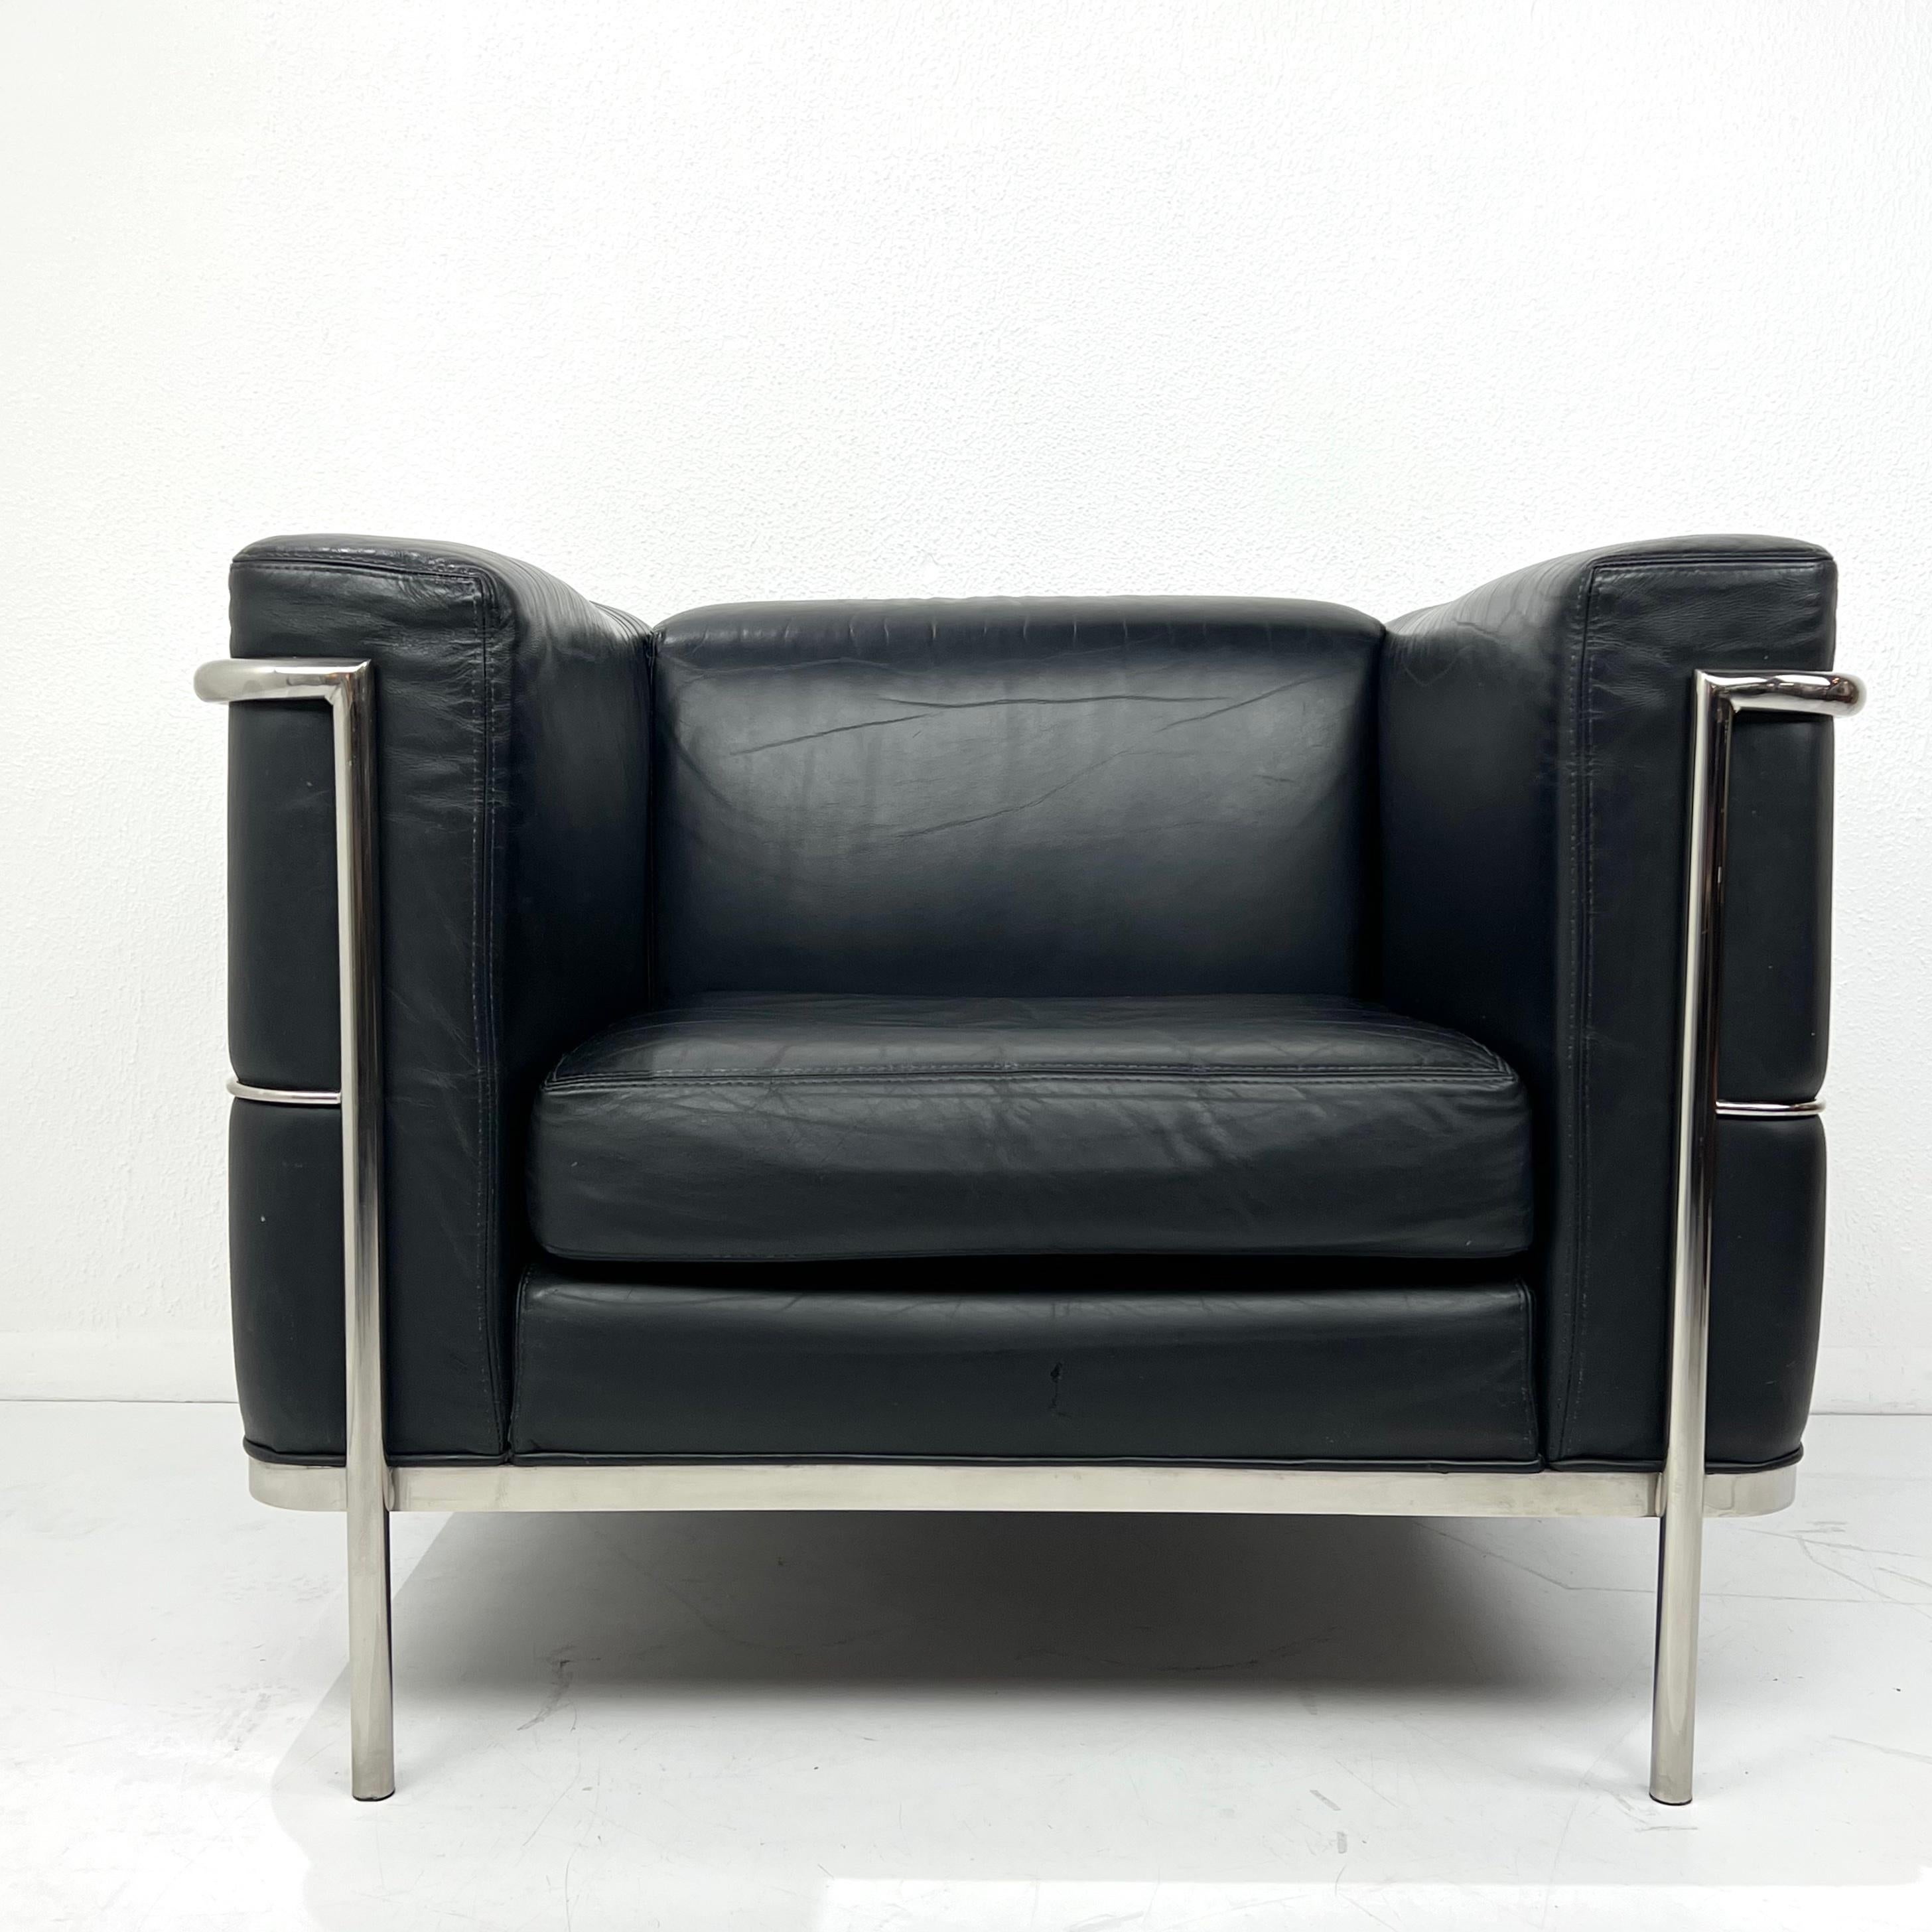 Handsome 20/123 cube club chair by Jack Cartwright after Le Corbusier’s LC2 chair. Features exposed tubular polished steel frame with black leather upholstery. Good condition with some wear/scratching consistent with age and use. Circa 2010. 